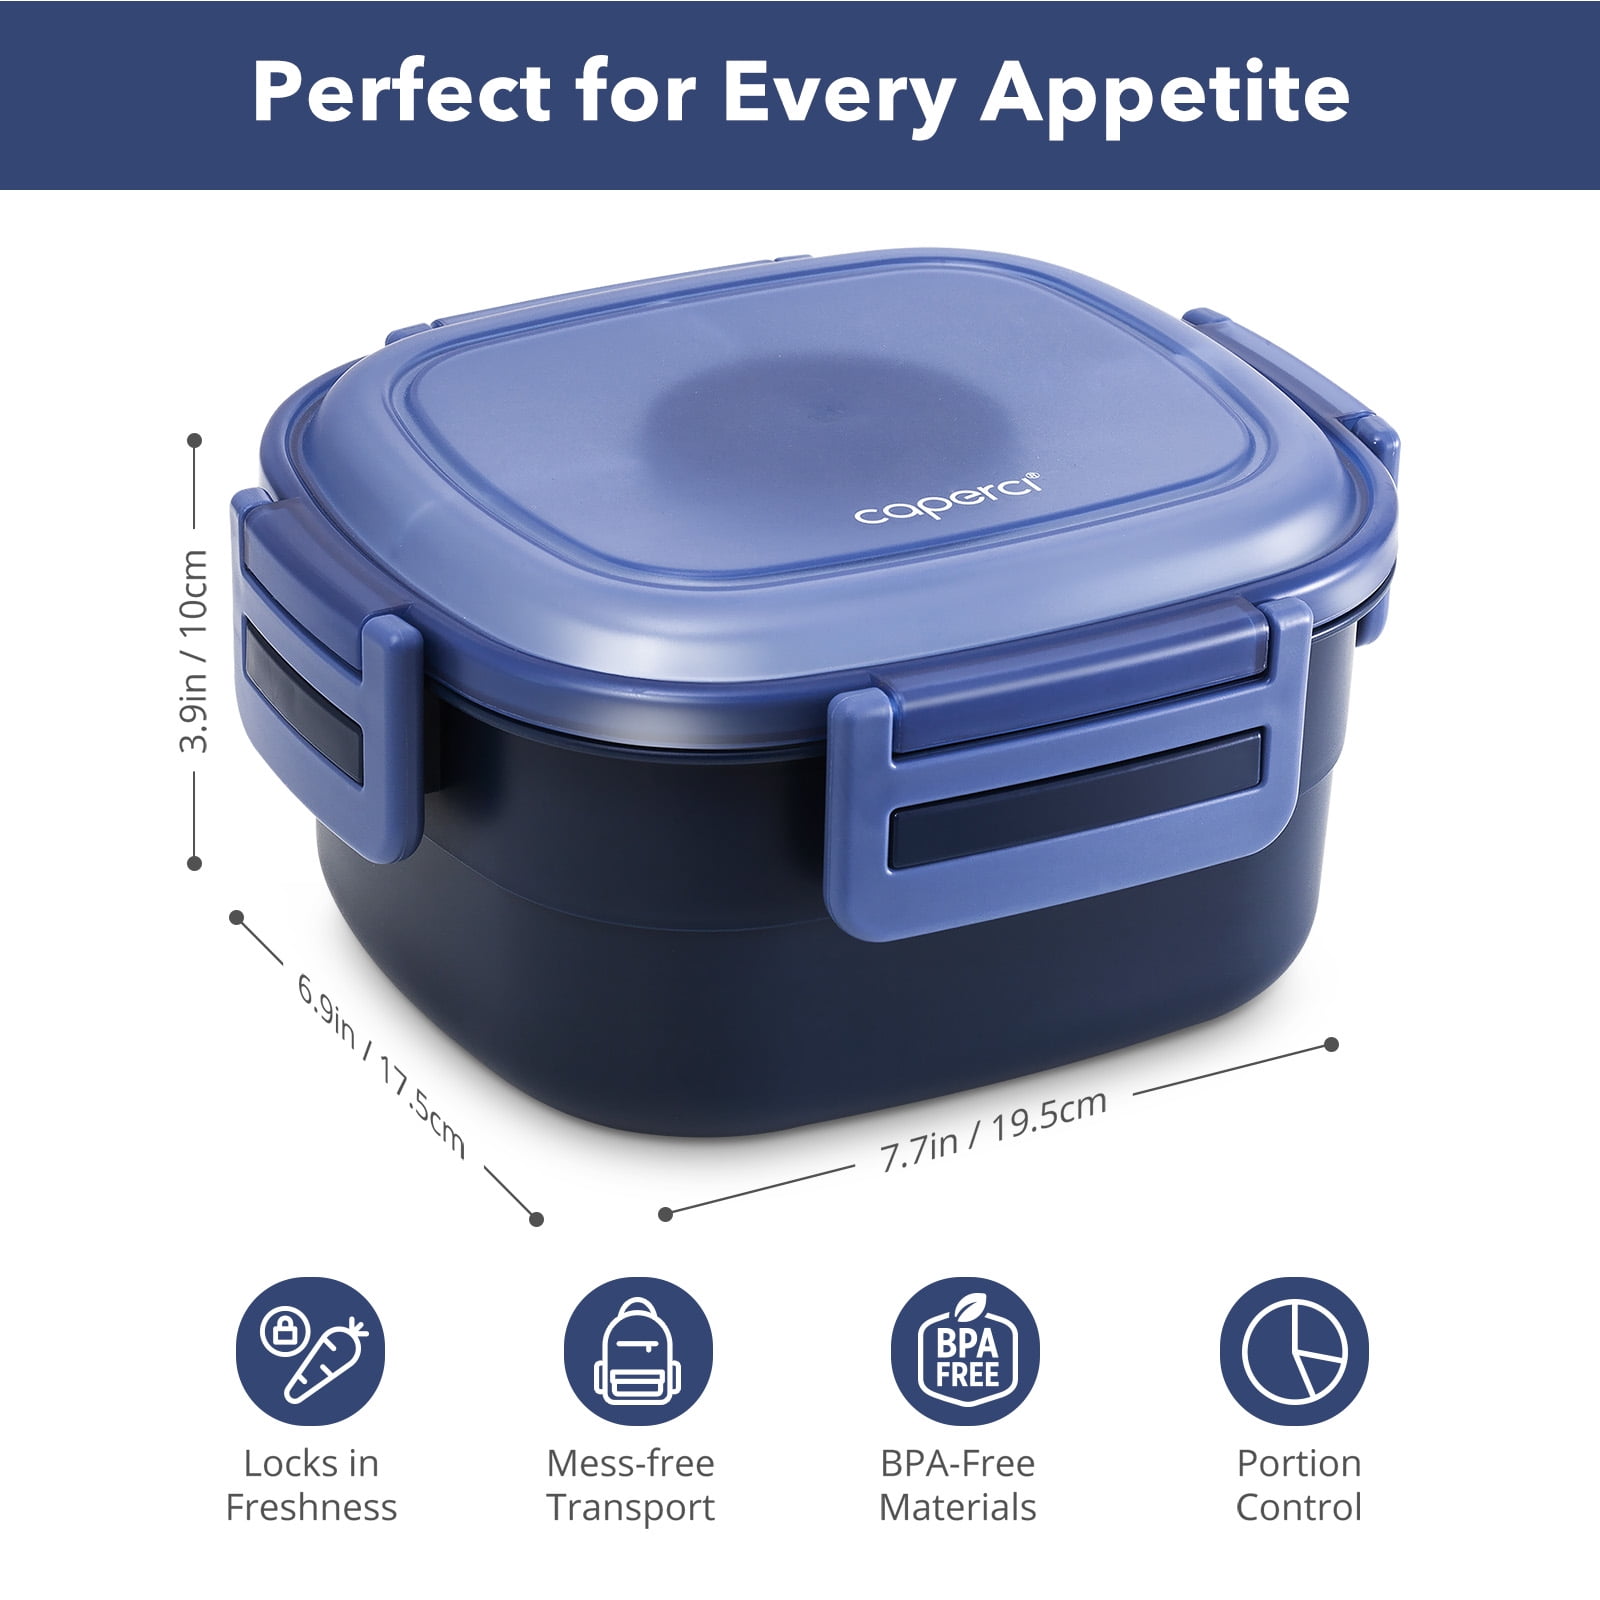 Caperci Large 68-oz Leakproof Salad Container for Lunch, Bento Lunch Box,  5-Compartment Tray for Toppings, 2pcs 3-oz Sauce Container for Dressings,  BPA-Free (Purple) 